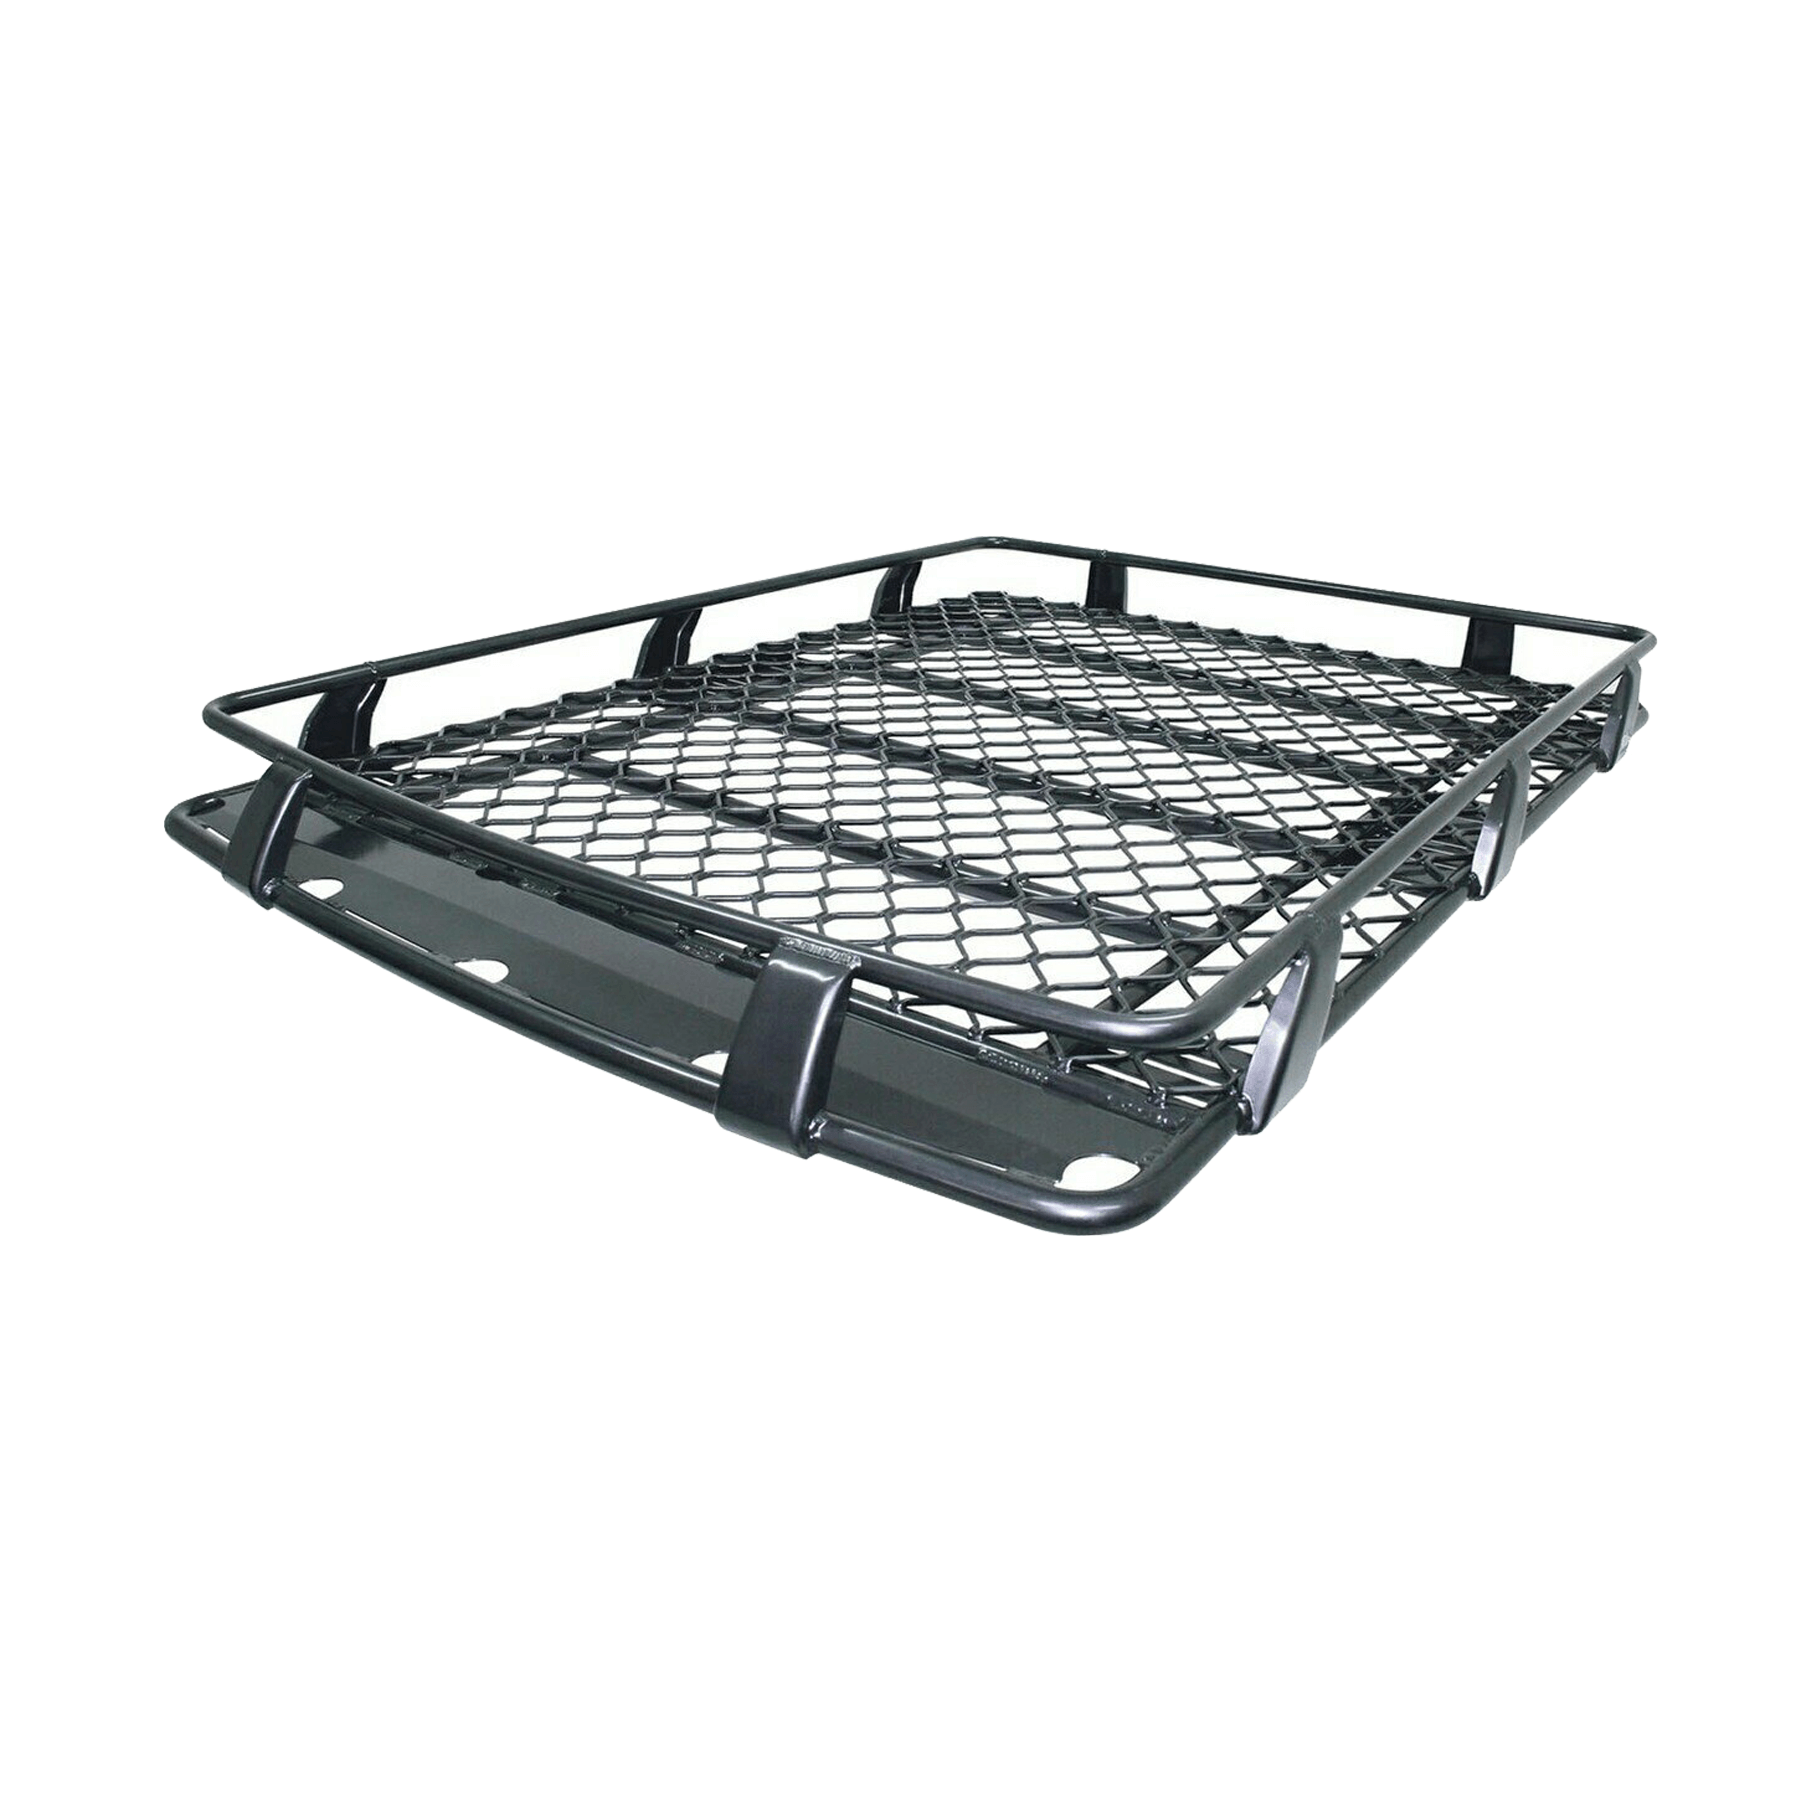 PATROL Y60 GQ 1987 TO 1997 BASKET ALLOY ROOF RACK – 2.2M X 1.25M (OPEN END)